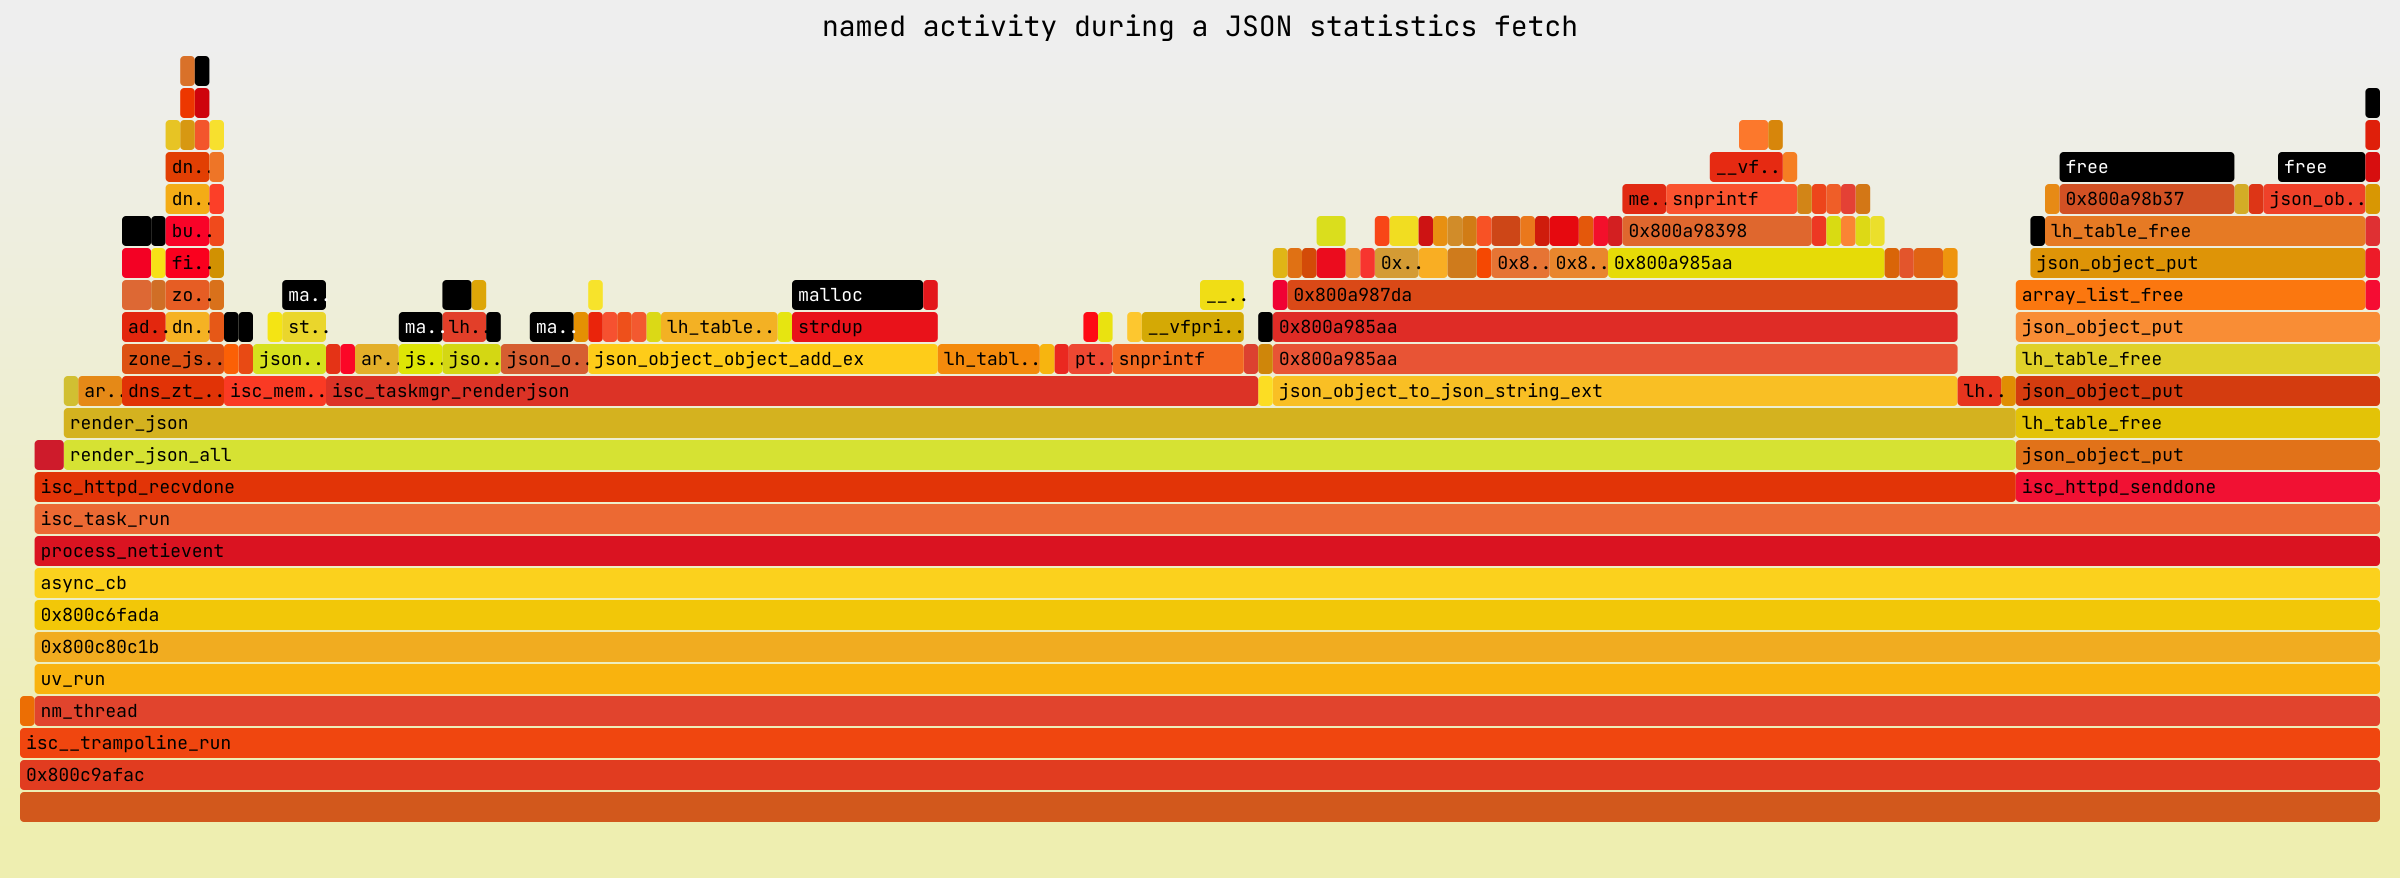 Chart titled 'named activity during a JSON statistics fetch,' with functions labeled